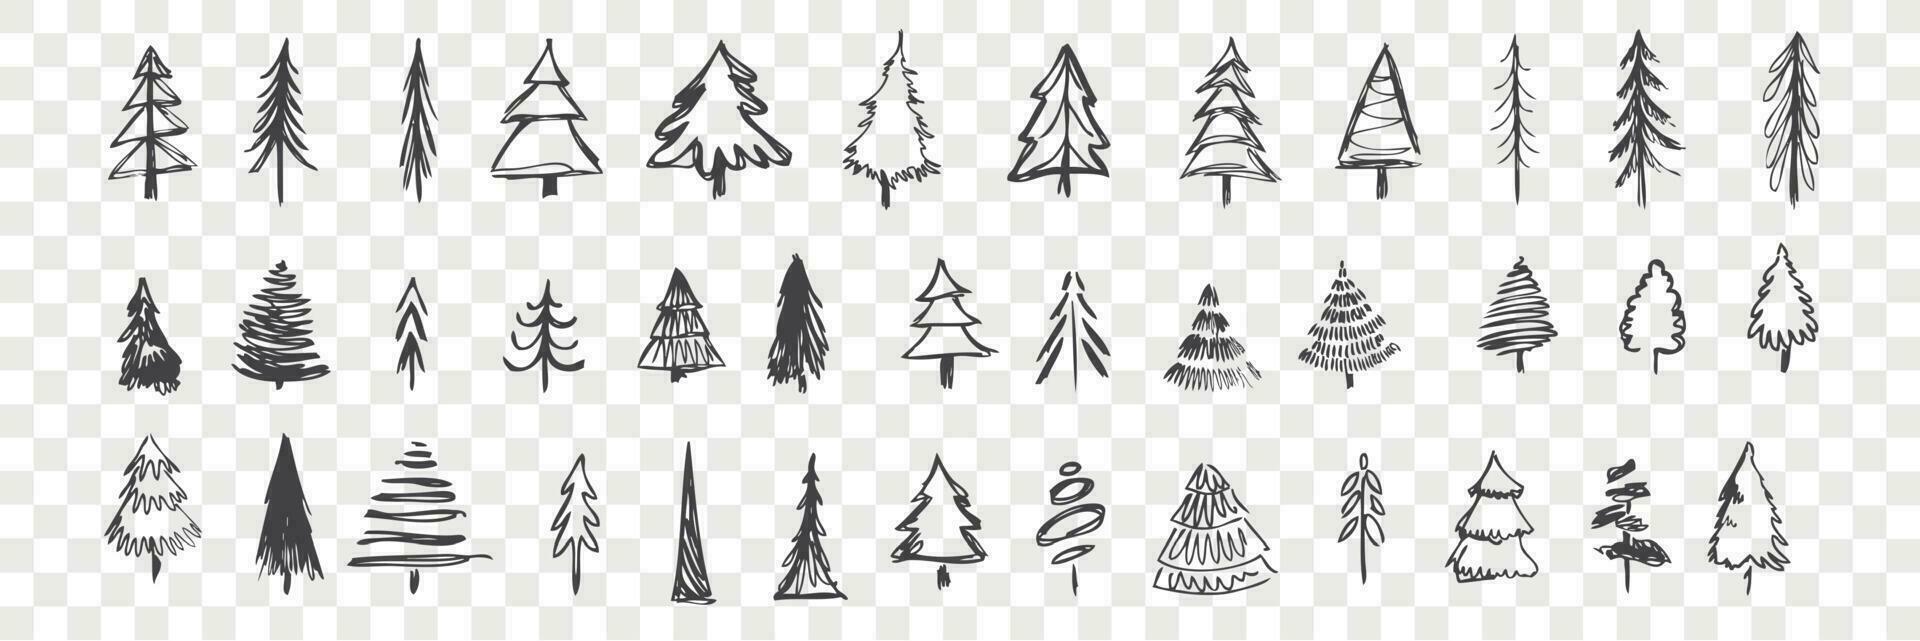 Hand drawn christmas trees set. Scribbles, doodles. Collection of pencil various scattered christmas trees. Sketches of different coniferous tree isolated on checkered background. New year symbol. vector